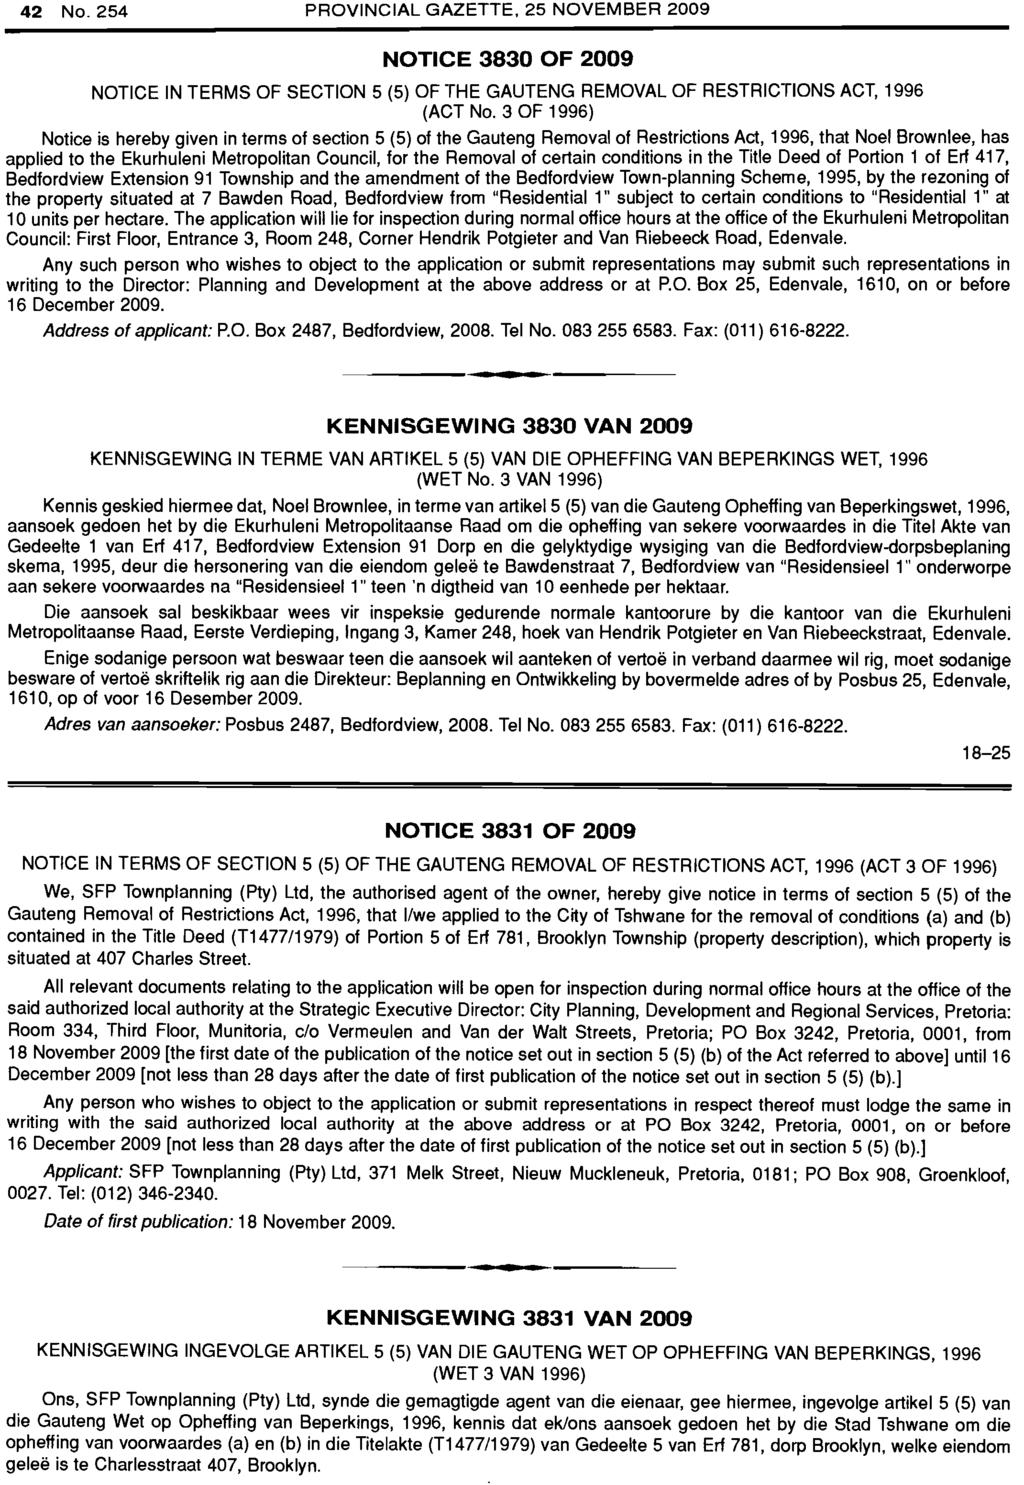 42 No. 254 PROVINCIAL GAZETTE, 25 NOVEMBER 2009 NOTICE 3830 OF 2009 NOTICE IN TERMS OF SECTION 5 (5) OF THE GAUTENG REMOVAL OF RESTRICTIONS ACT, 1996 (ACT No.